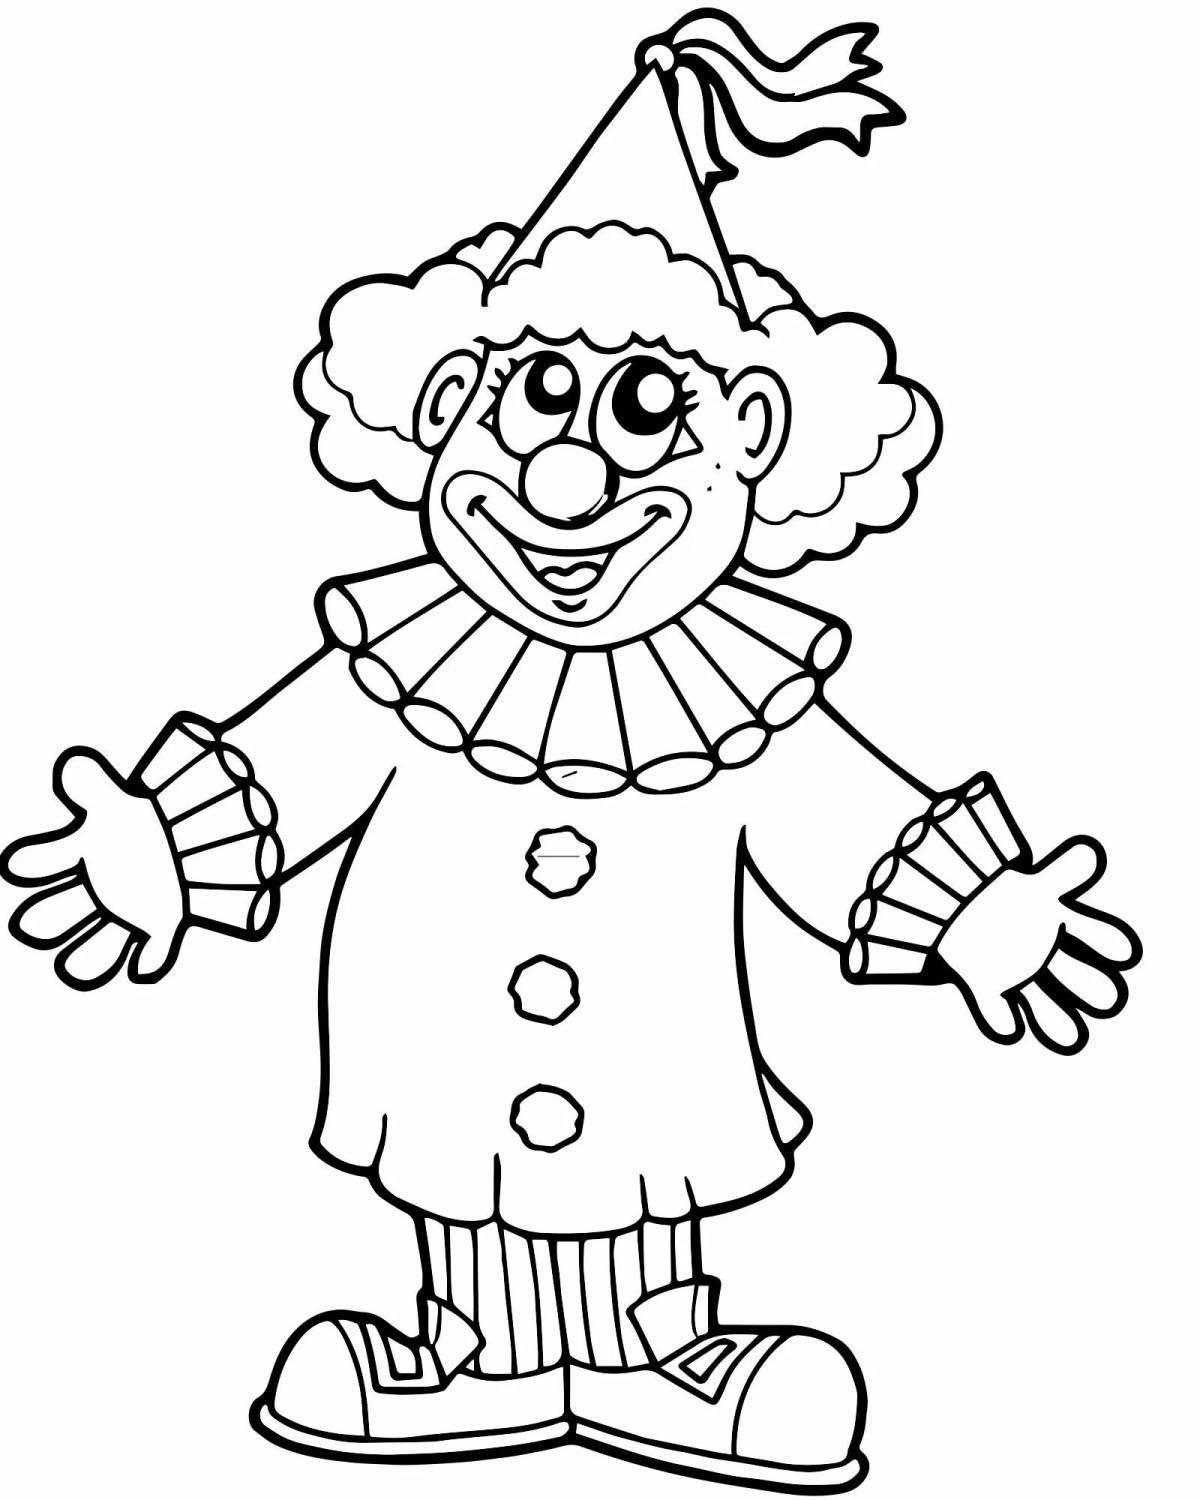 Colorful jester coloring page for kids